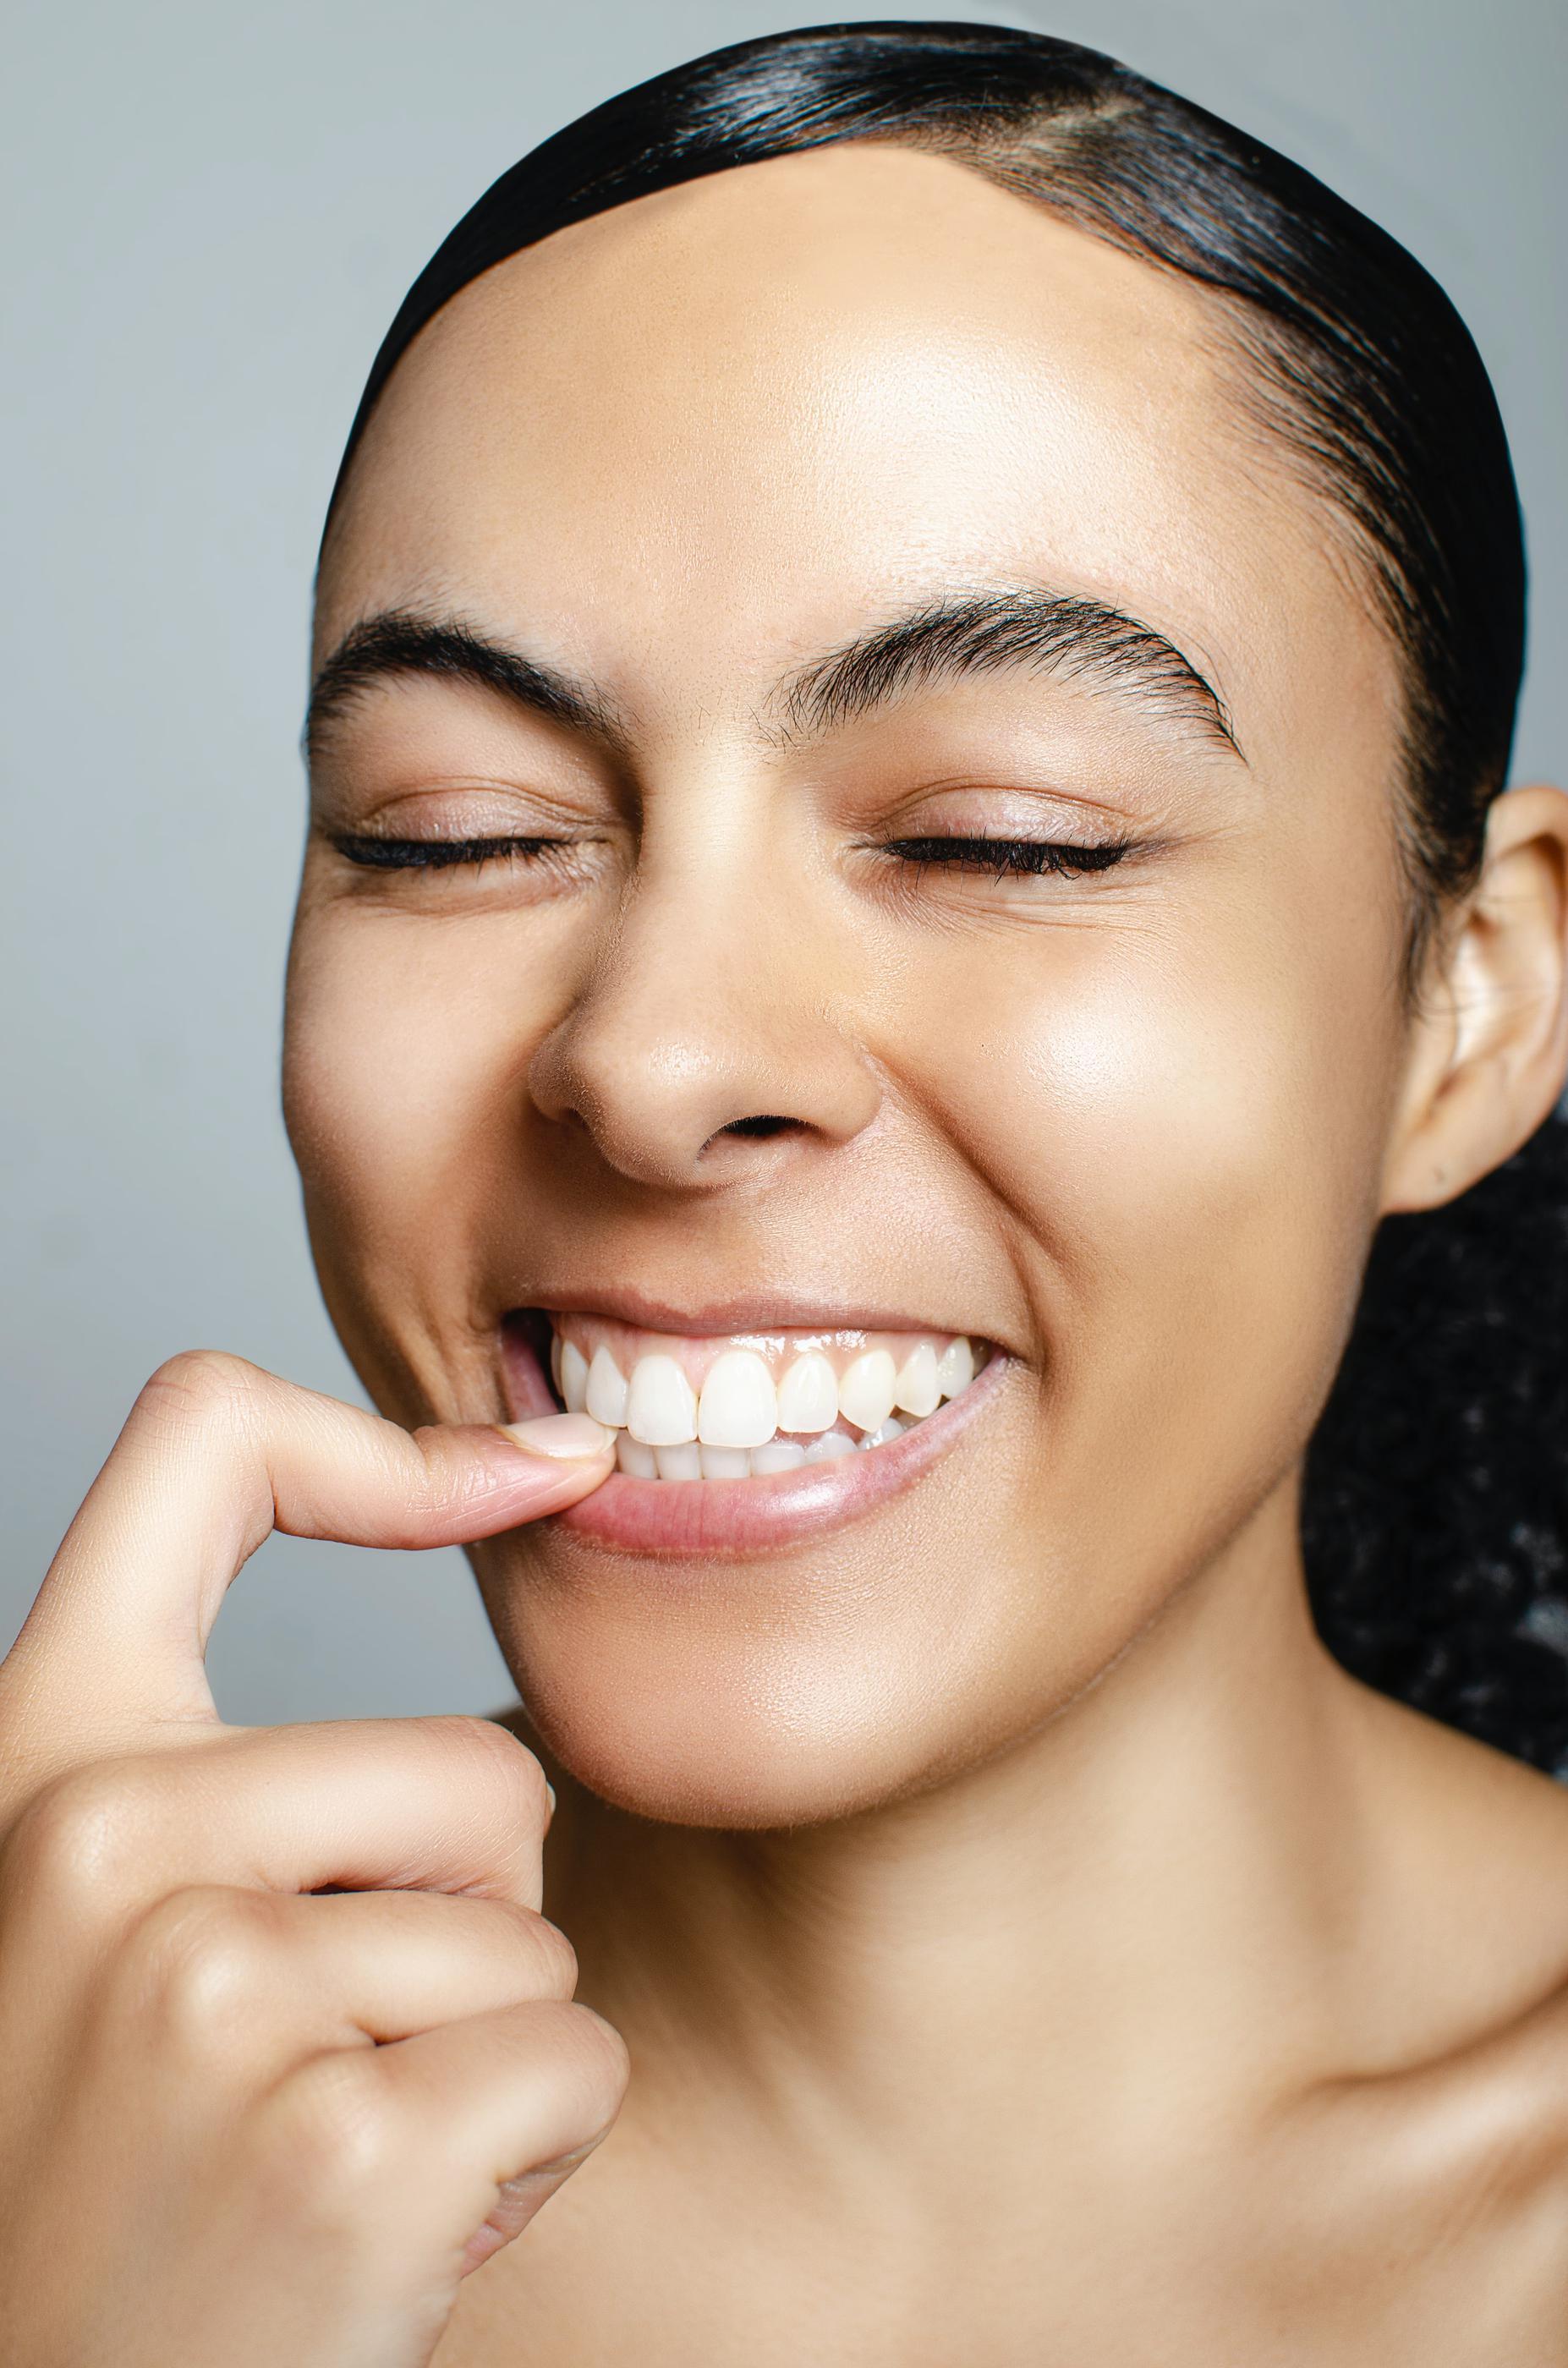 “Does teeth whitening hurt?” and Other FAQs